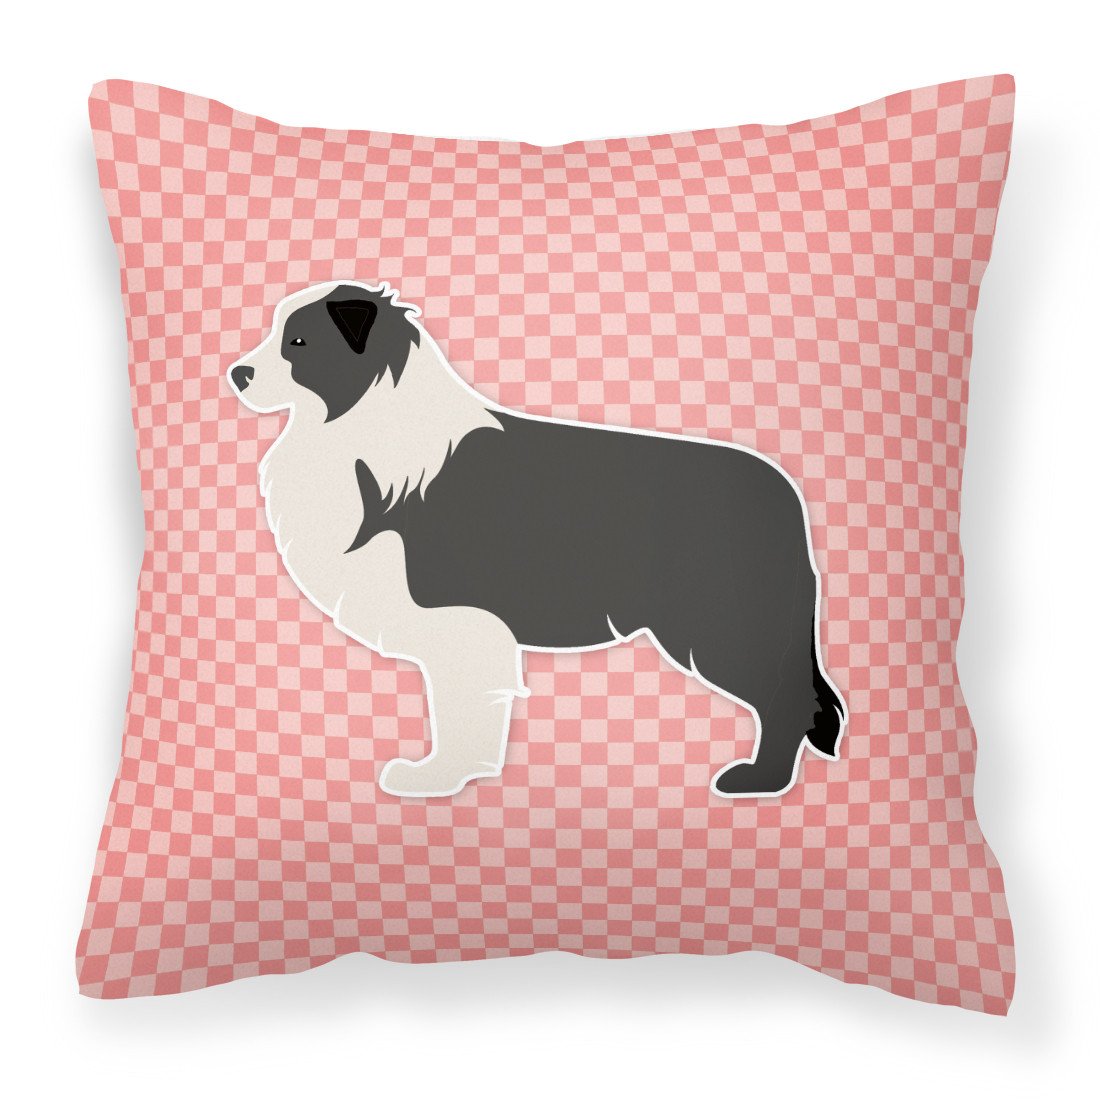 Black Border Collie Checkerboard Pink Fabric Decorative Pillow BB3623PW1818 by Caroline's Treasures